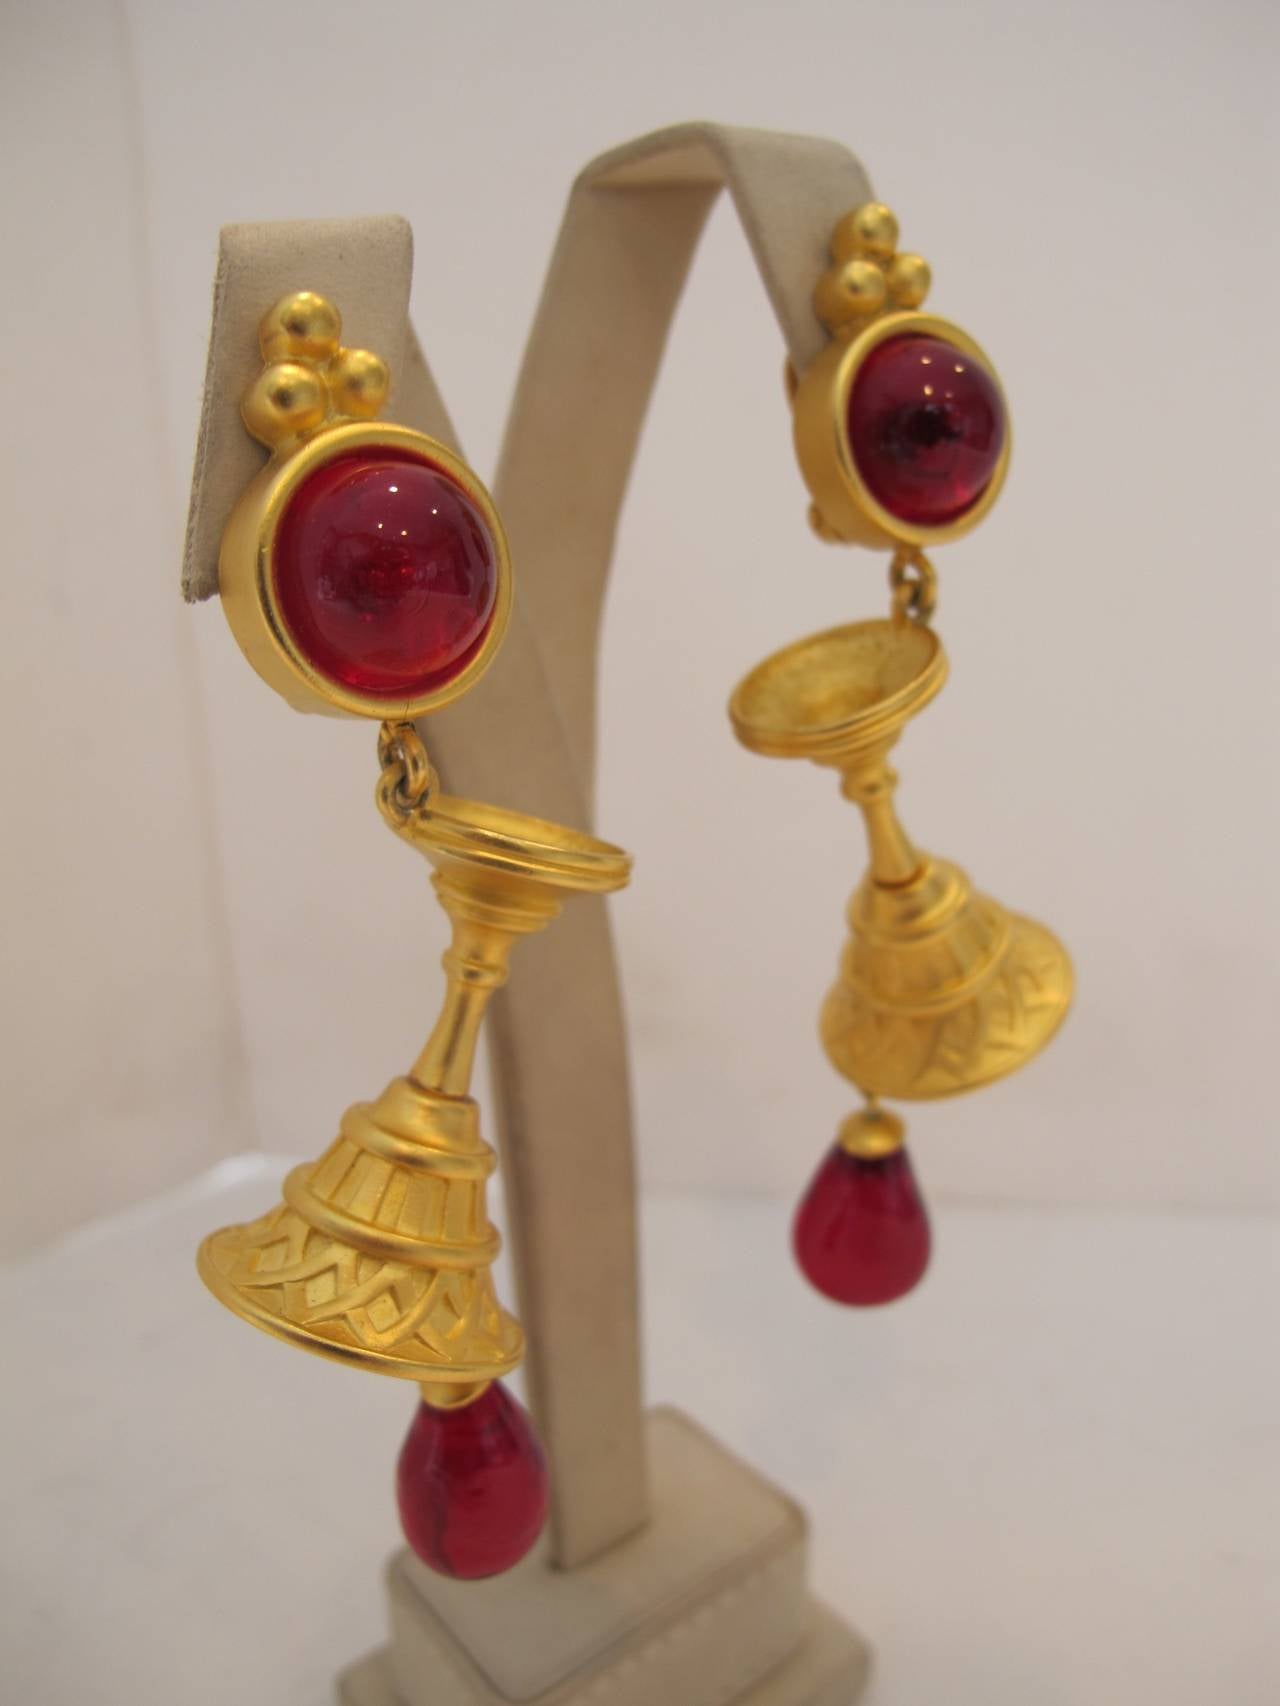 Fabulous, rare wine goblet earrings with red stones with goblets cascading with drops of red wine. Signed KL on the back.